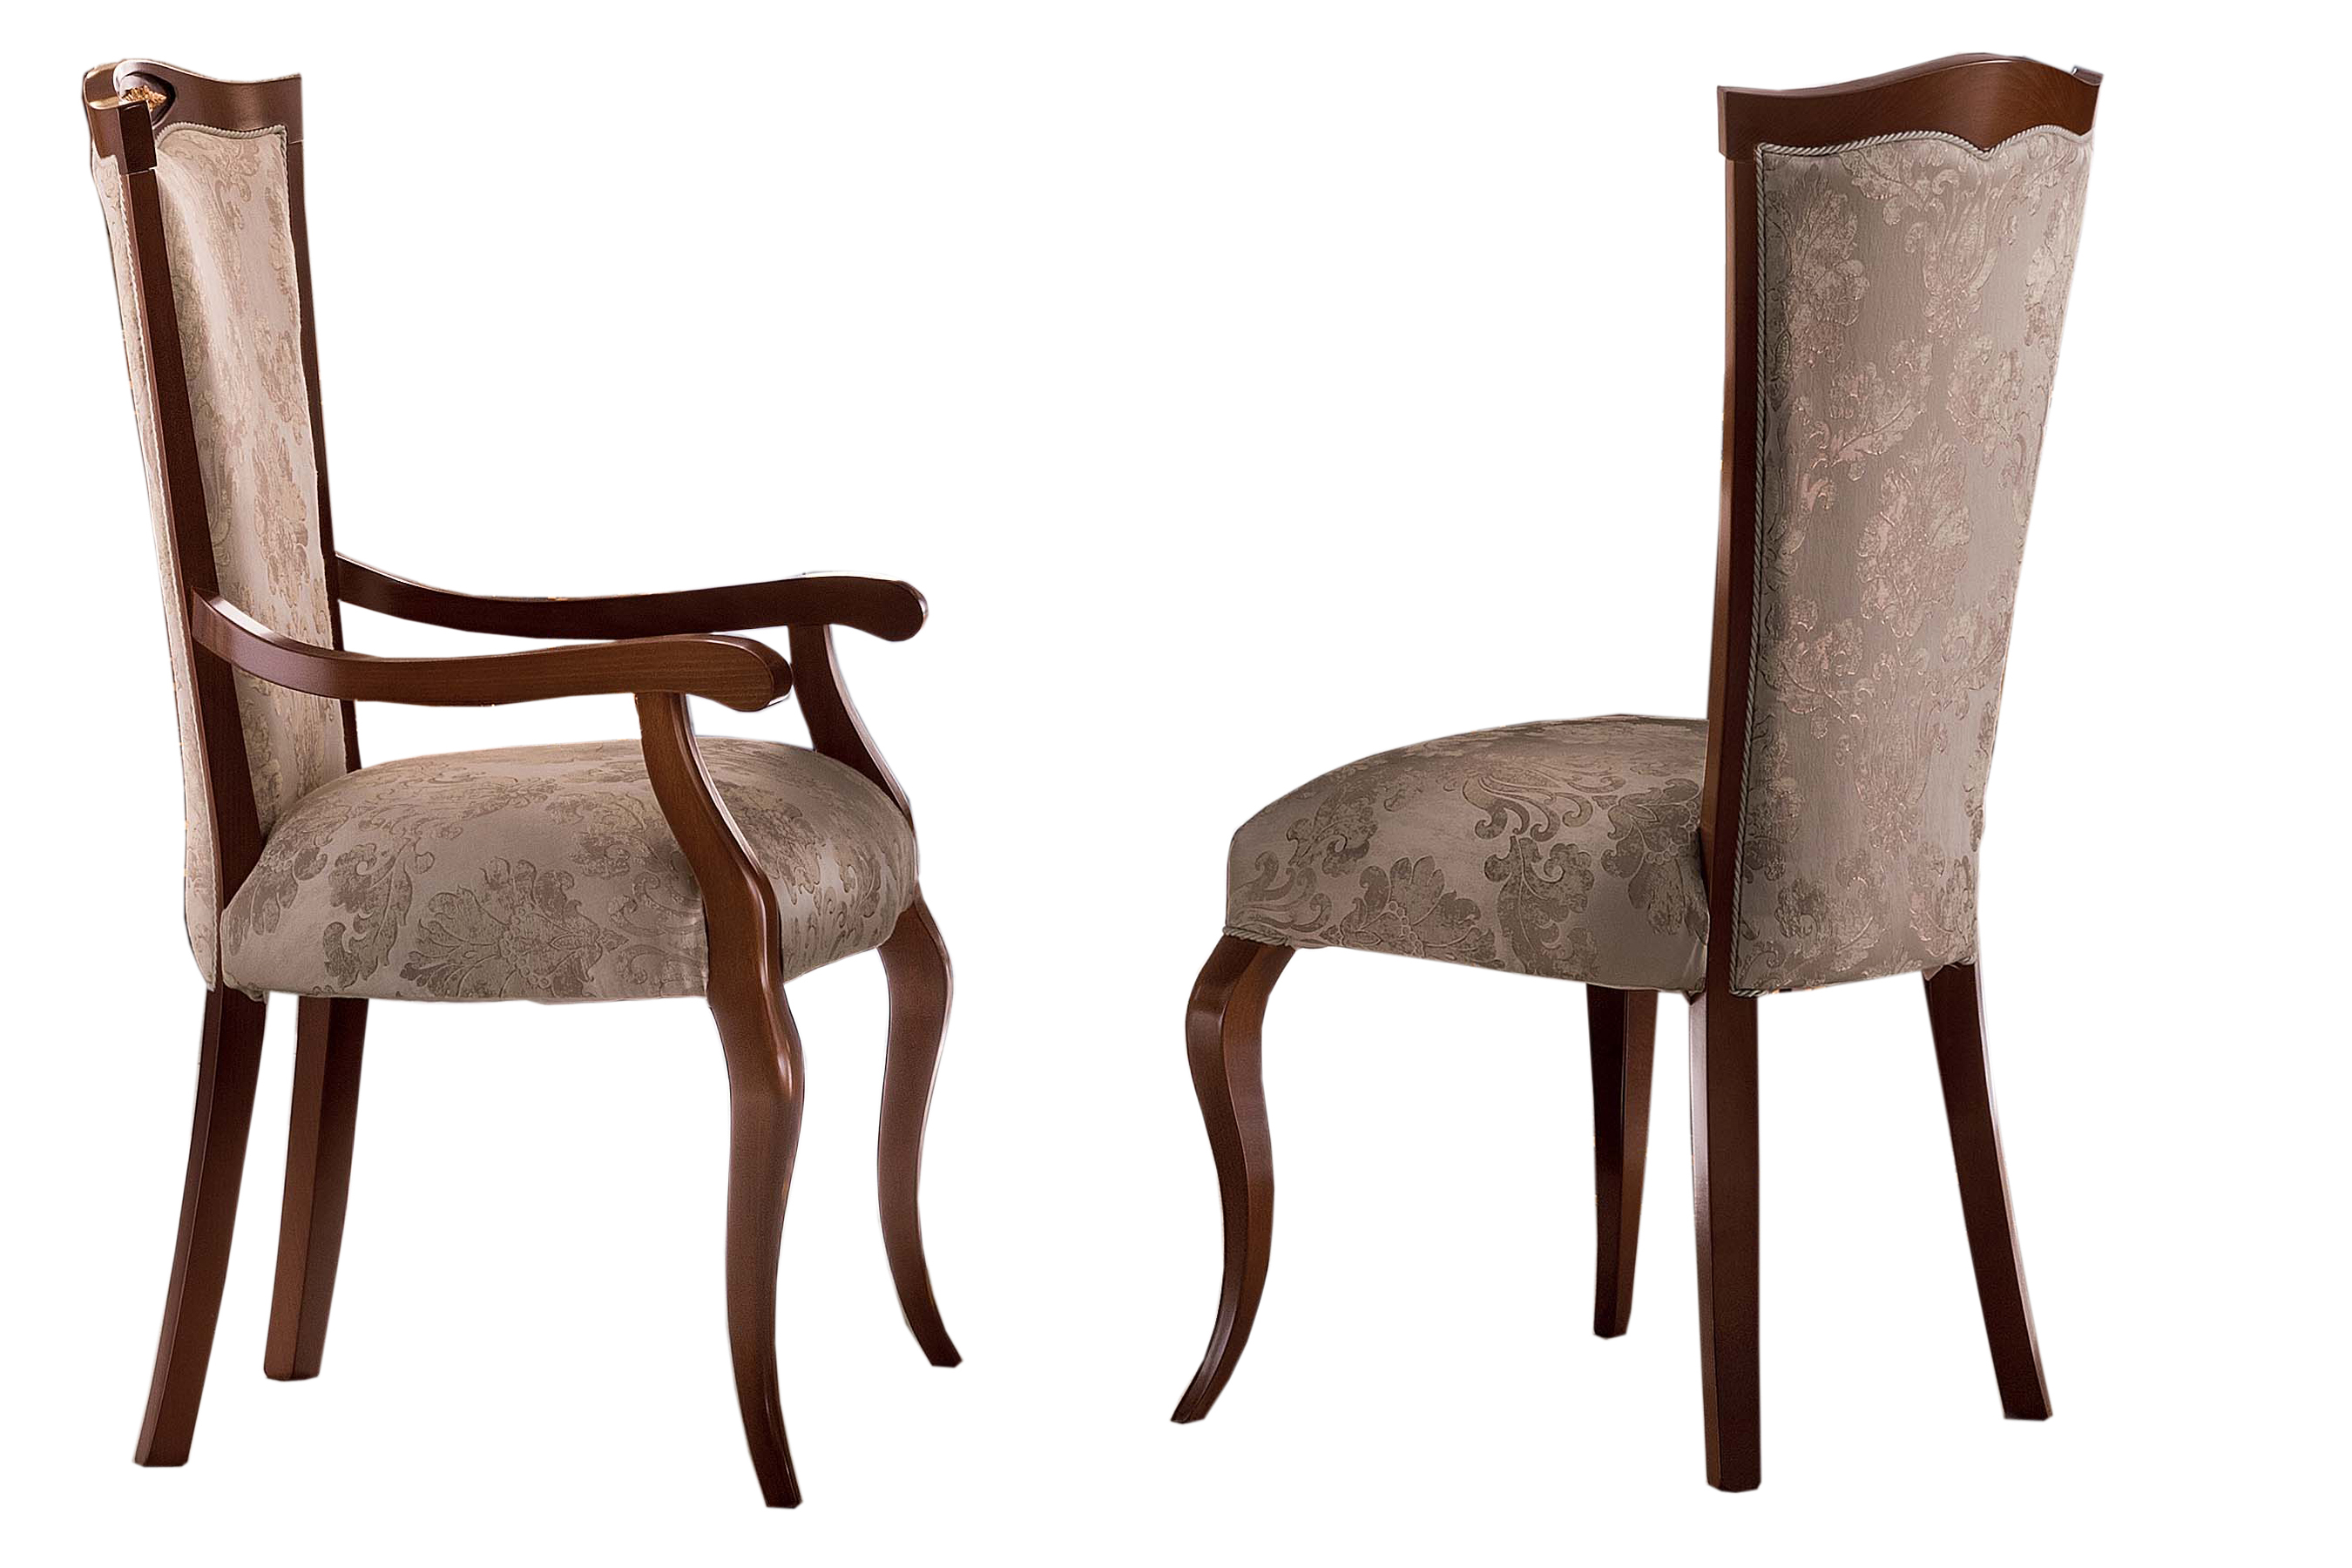 Dining Room Furniture Tables Modigliani Chair by Arredoclassic